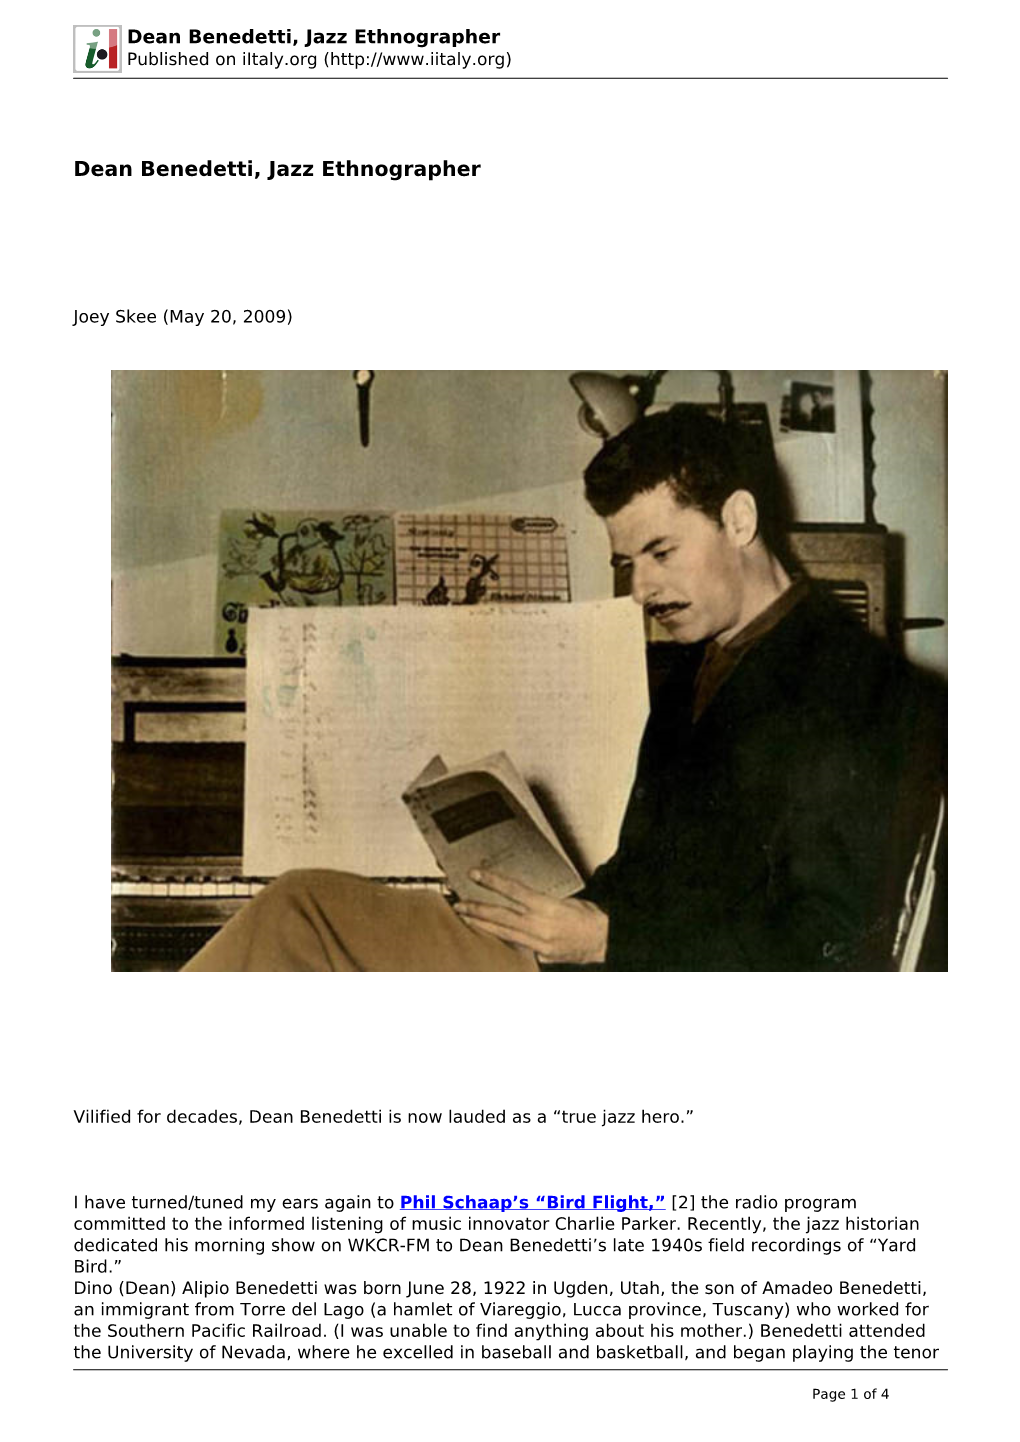 Dean Benedetti, Jazz Ethnographer Published on Iitaly.Org (